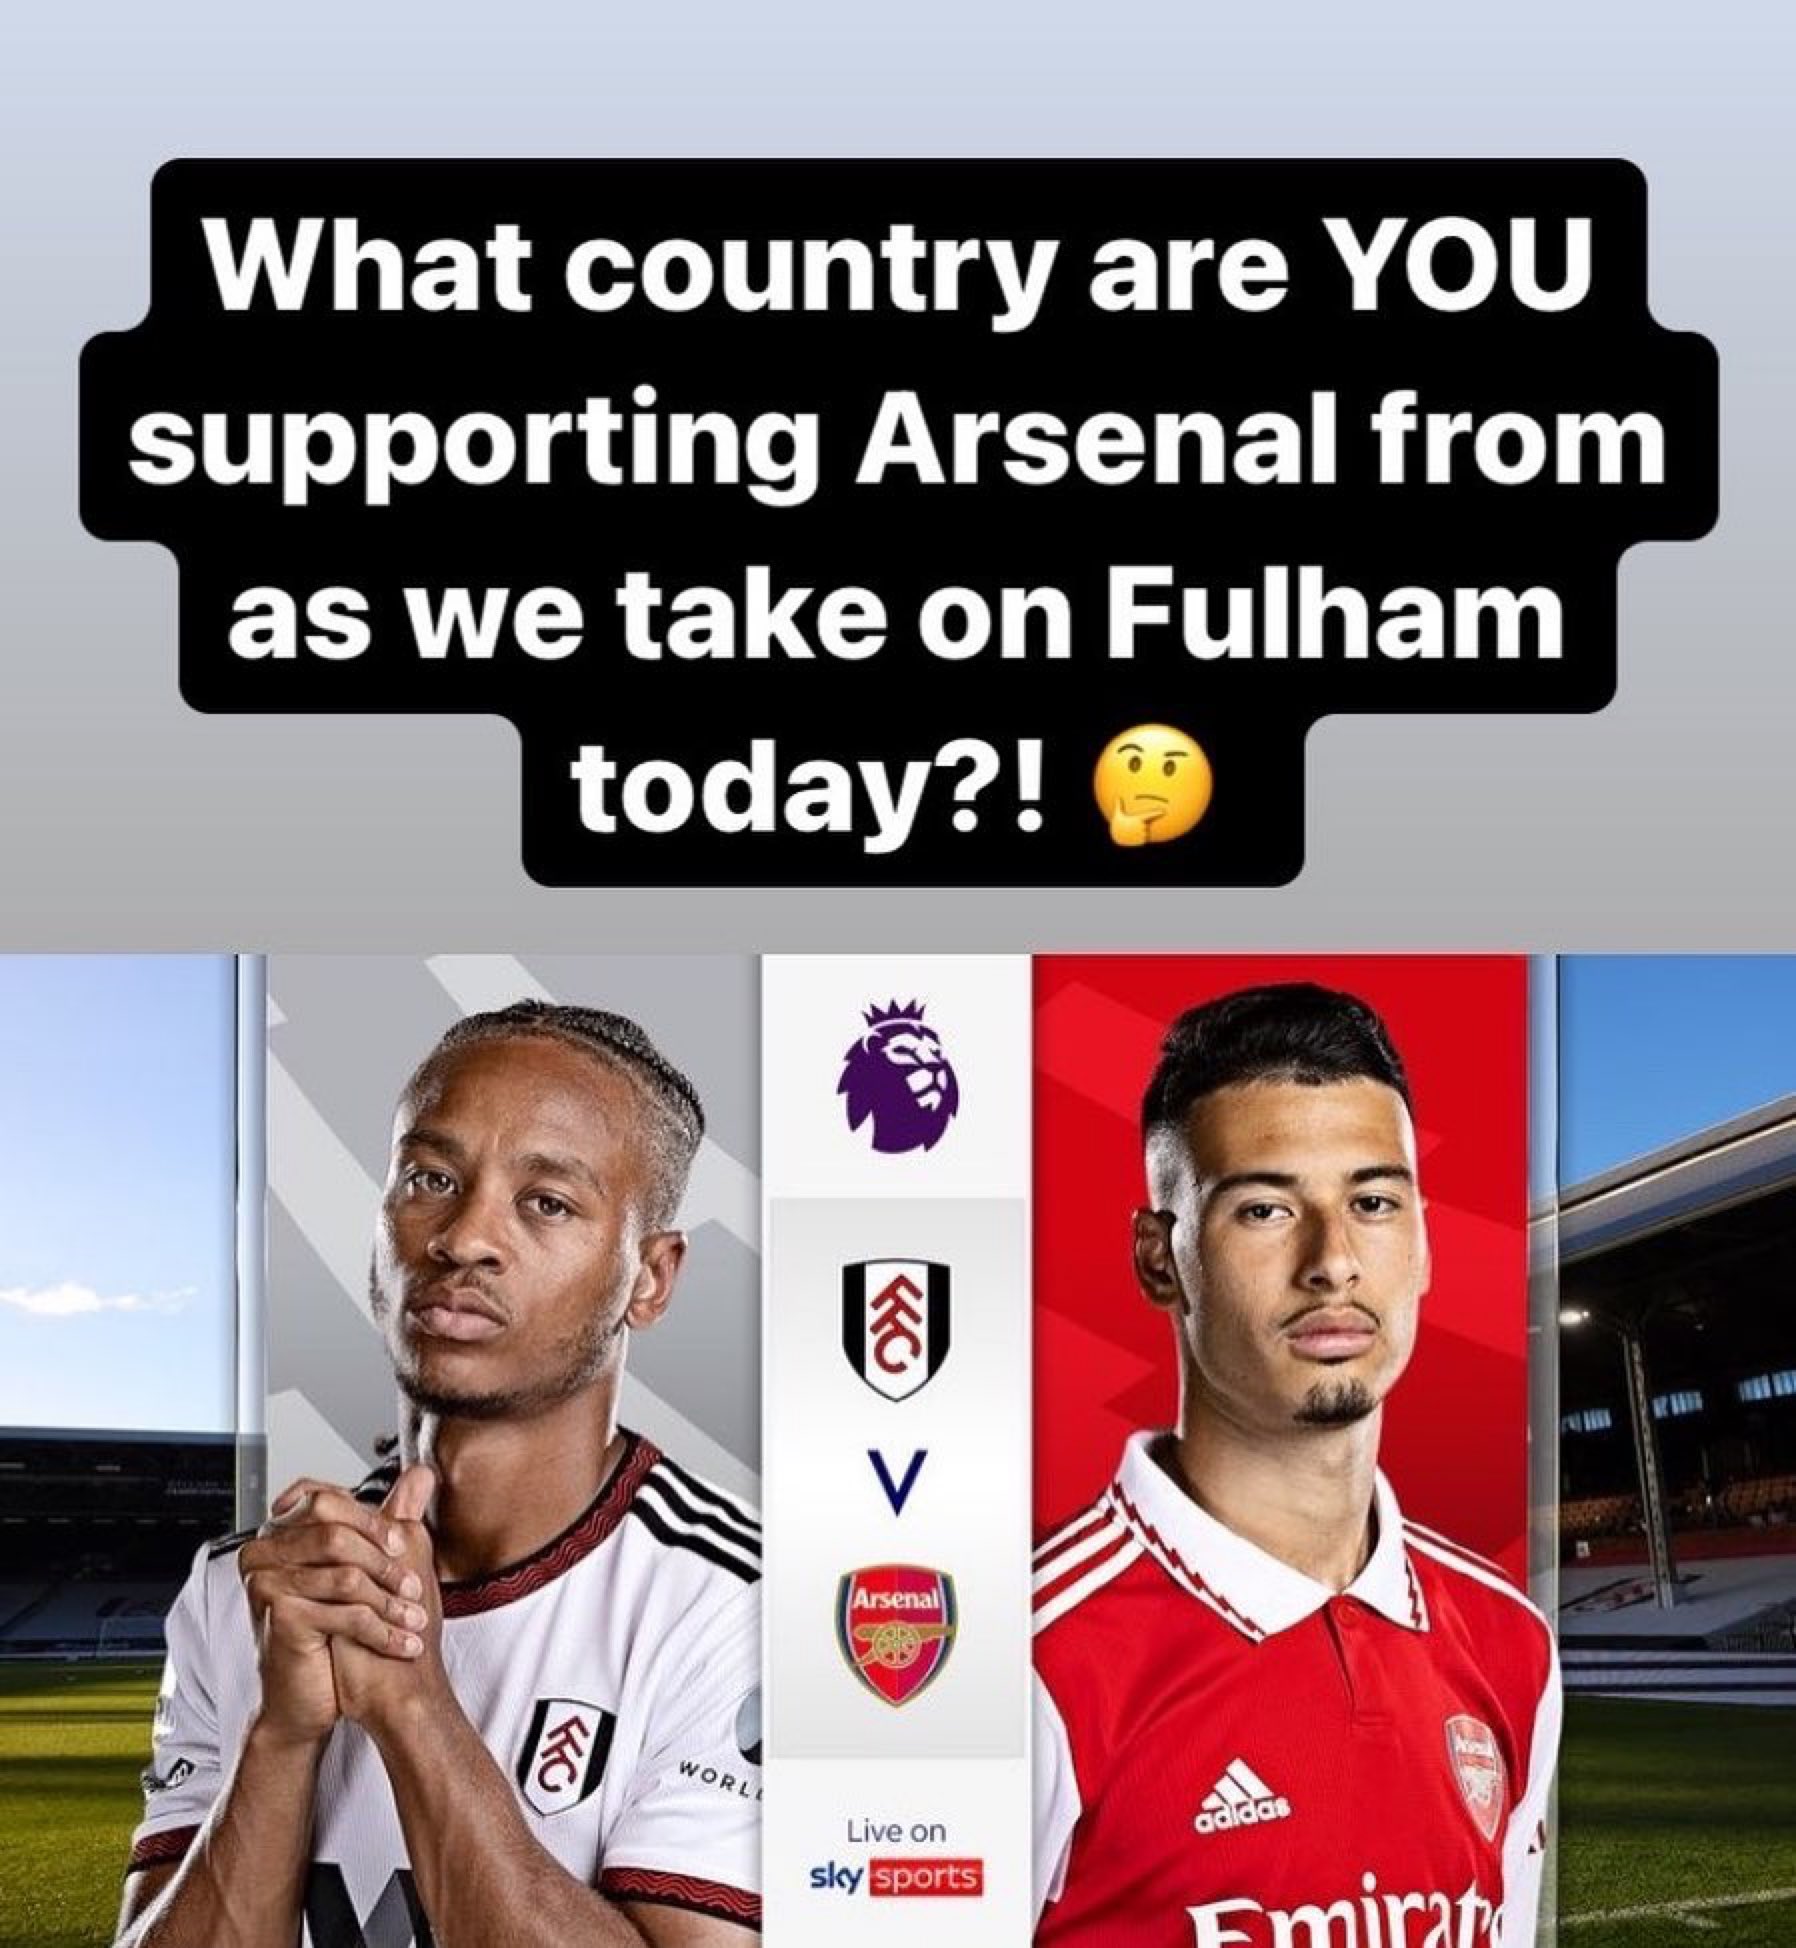 Arsenal News Channel on Twitter: YOUR flag in the comments below #Arsenal fans! 👀 ✍️ 👇 https://t.co/AeSKGAEl84" / Twitter